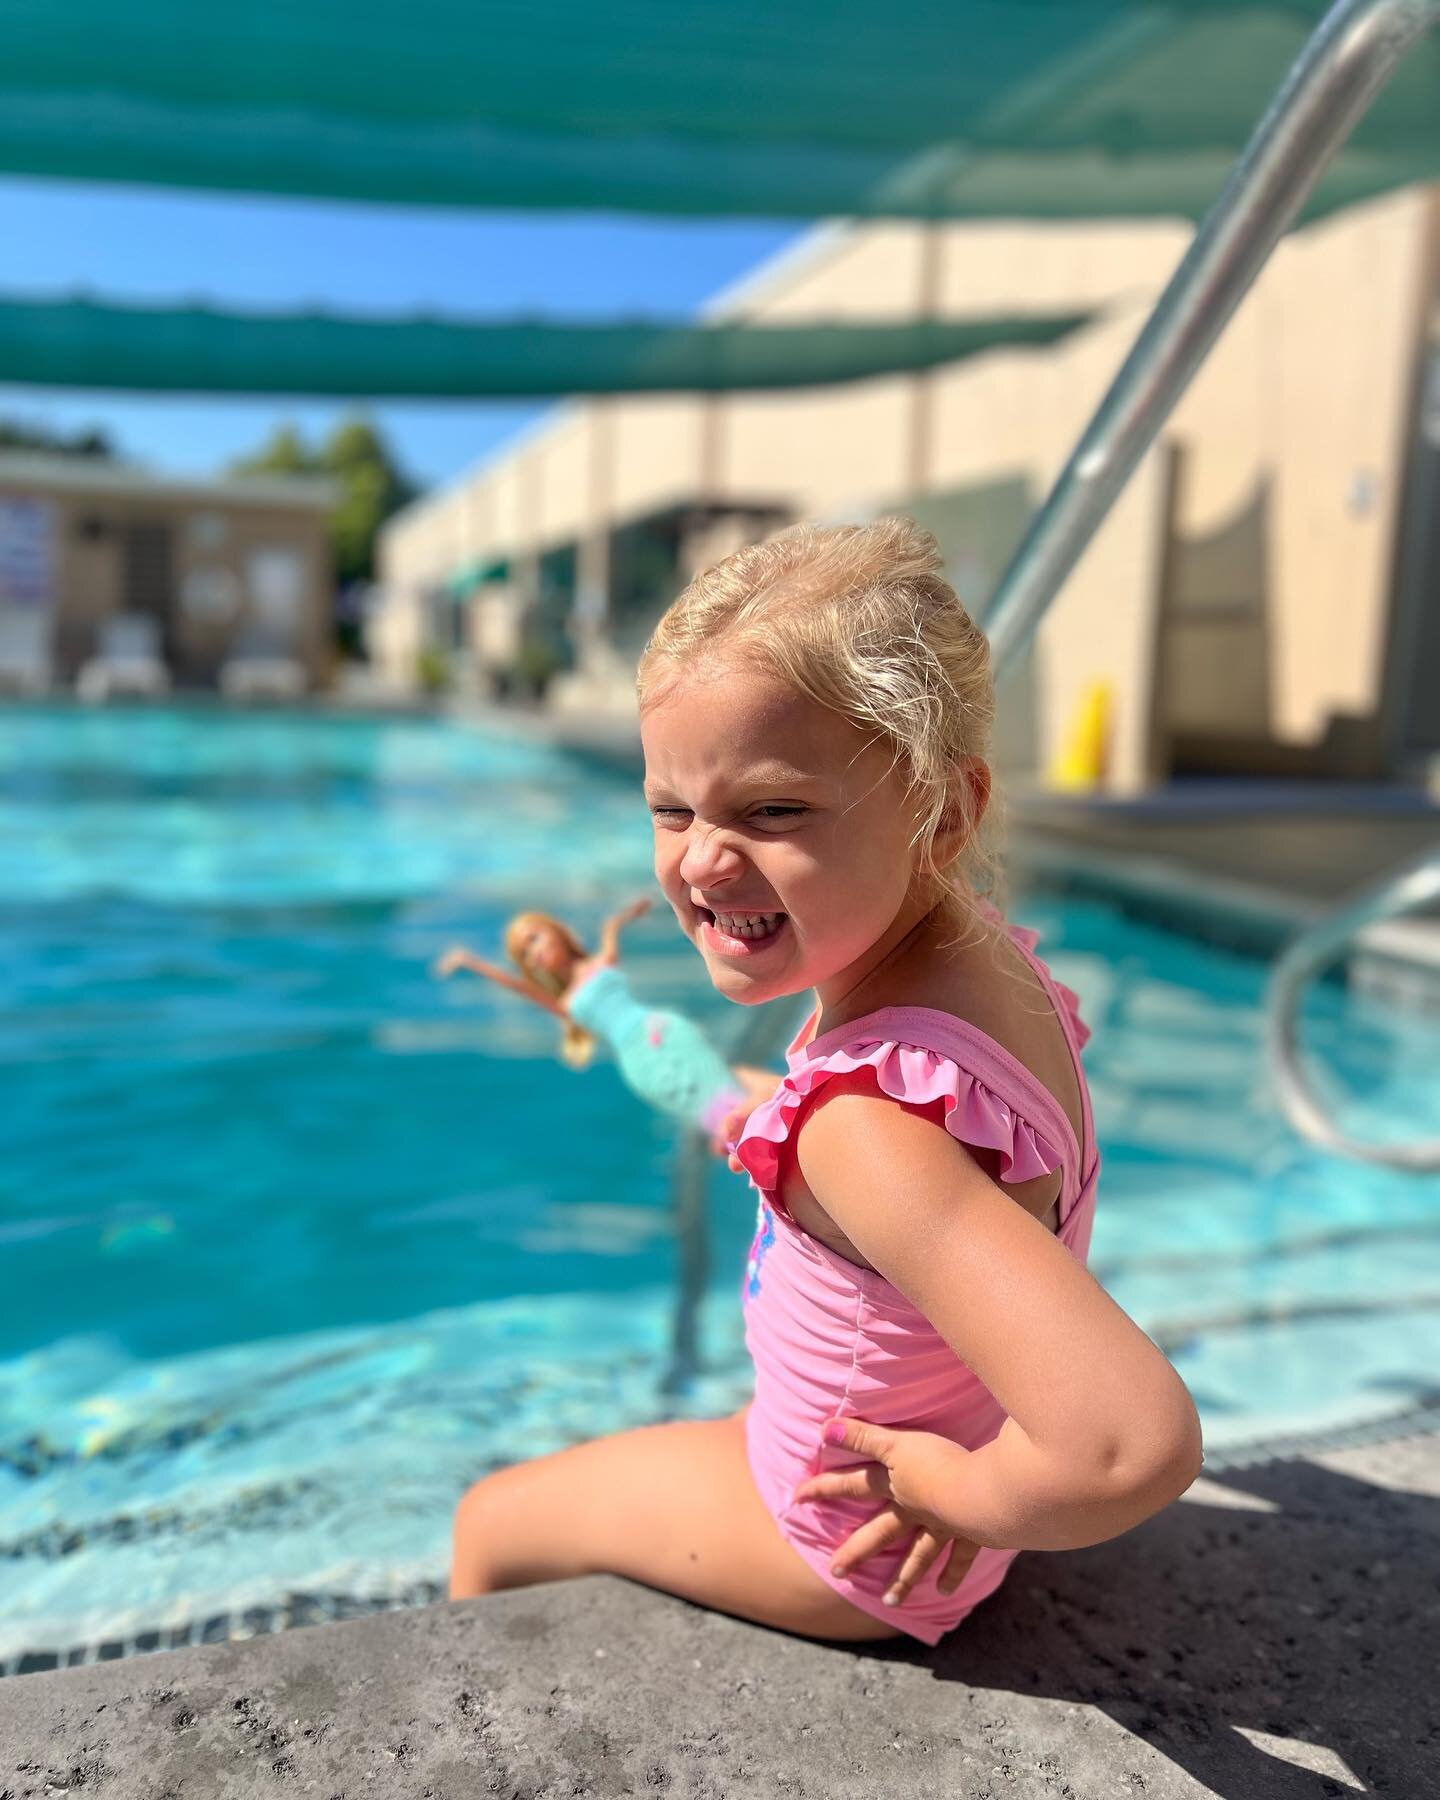 Don&rsquo;t miss out on the opportunity to swim in our comfortable, heated pool while this gorgeous weather gracing us with its presence! 

See you soon 🏊 

#swimming #chicopools #chicoca #swimmingpools #chicoswimming